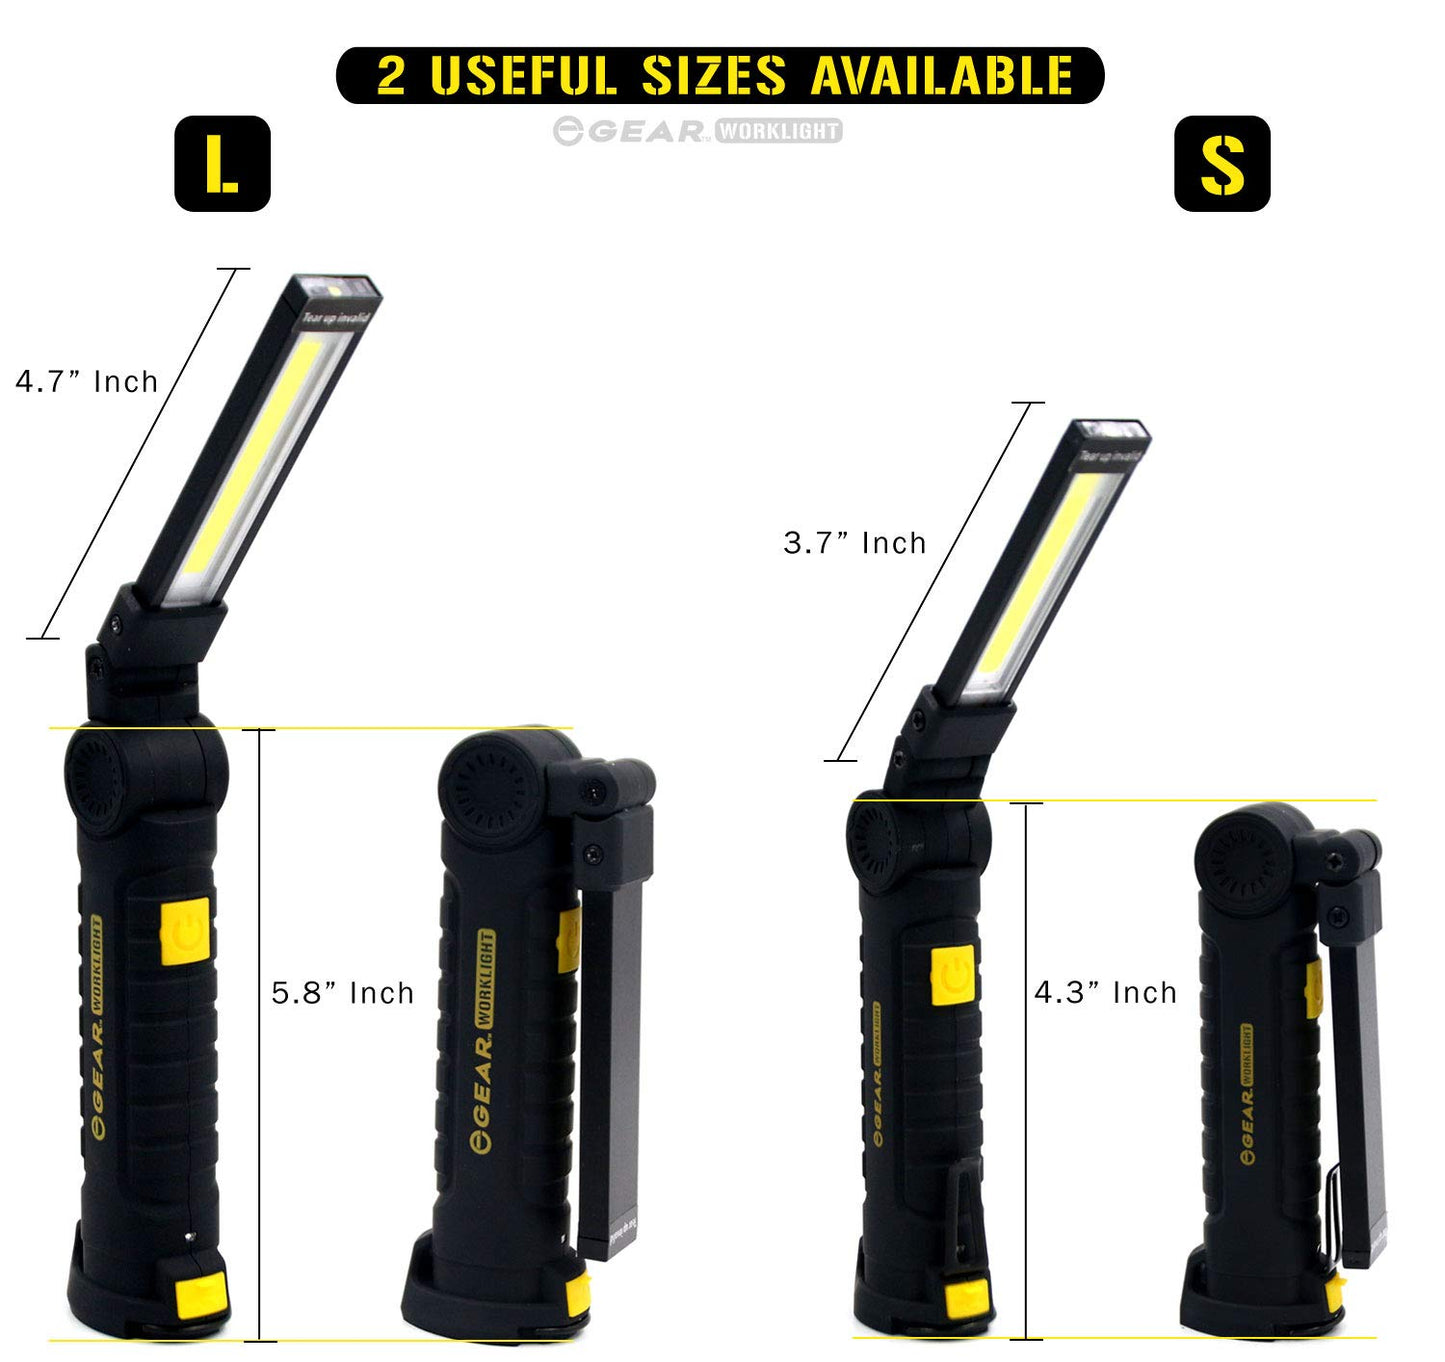 Enthusiast Gear LED COB Work Light - USB Rechargeable Flashlight with Magnetic Base 360° Rotate (2 Pack)